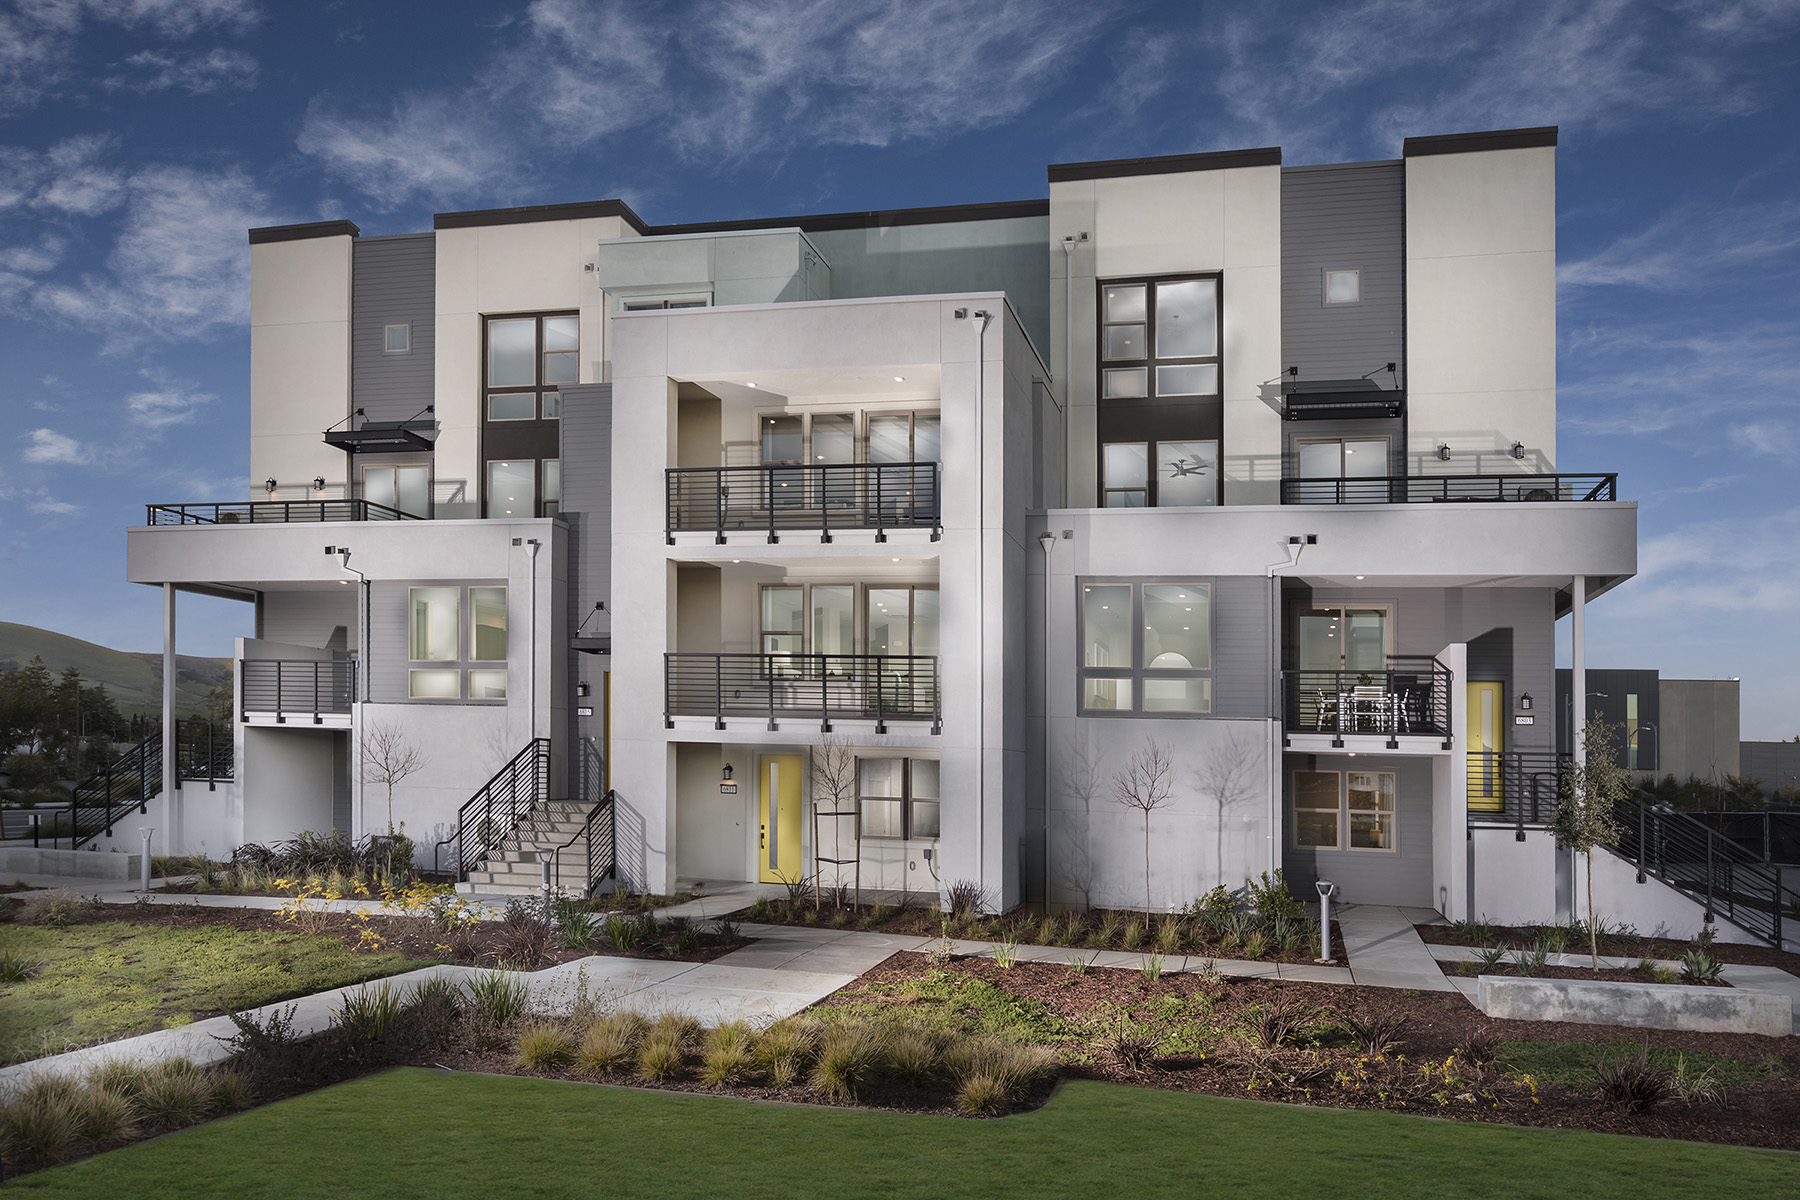 KTGY-Designed Communities Receive Recognition for Best Architectural Design at San Francisco's Bay Area's 45th Annual MAME Awards